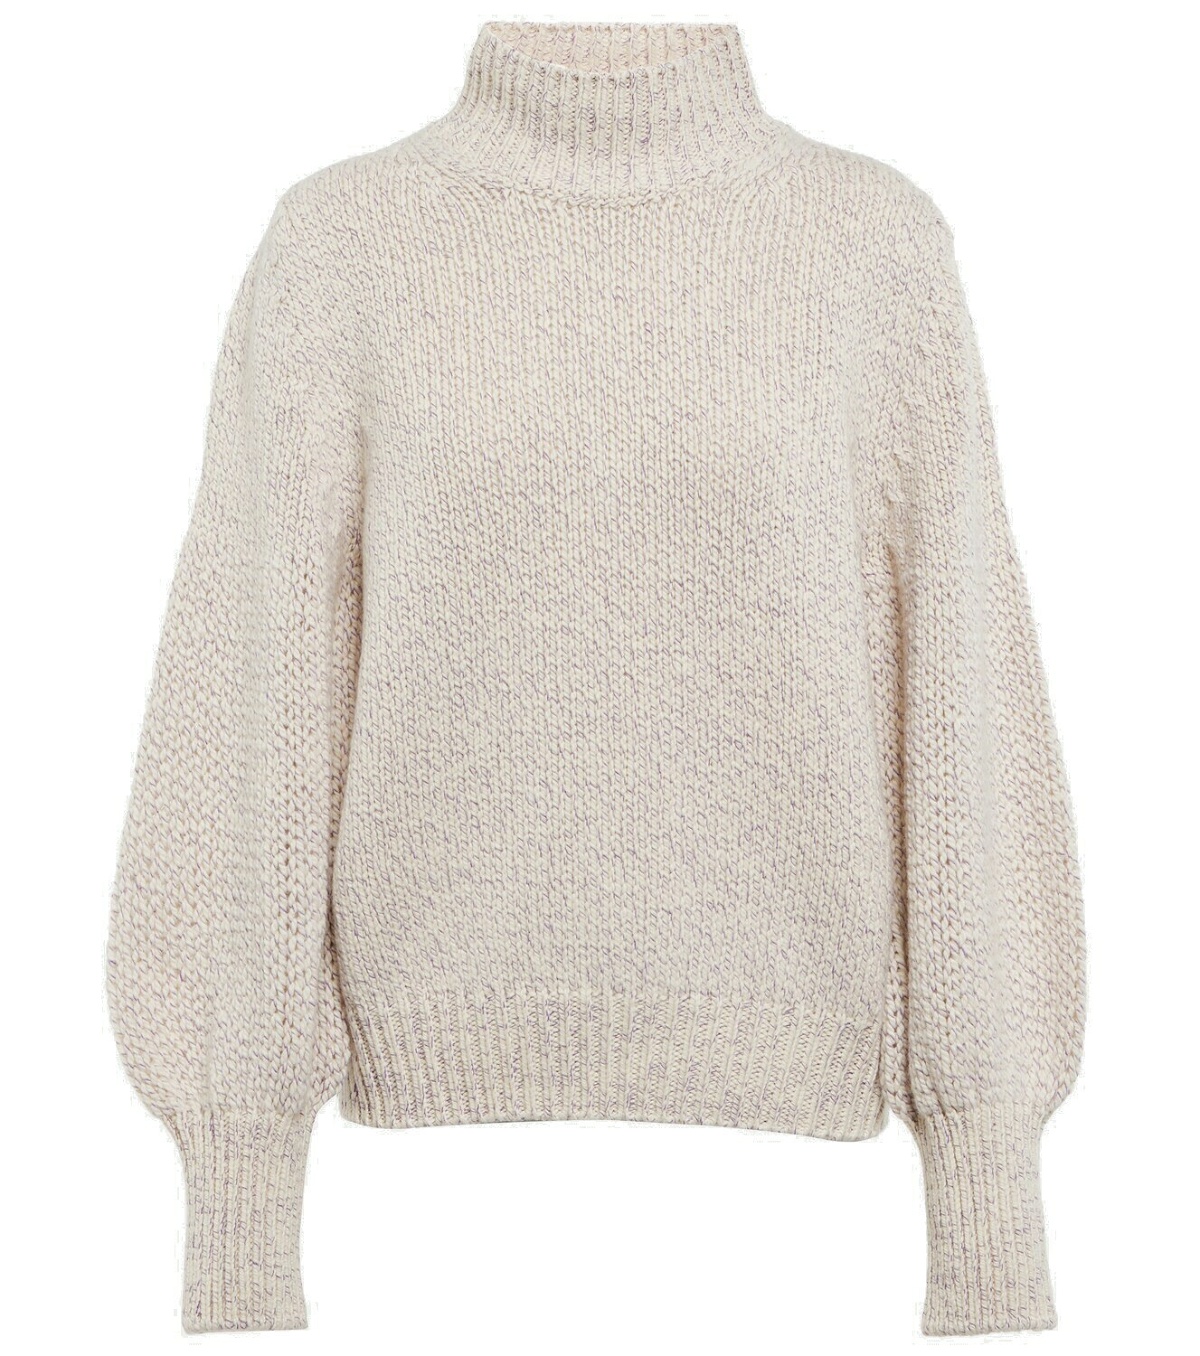 Dorothee Schumacher - Luxury Volumes cashmere and wool sweater Dorothee ...